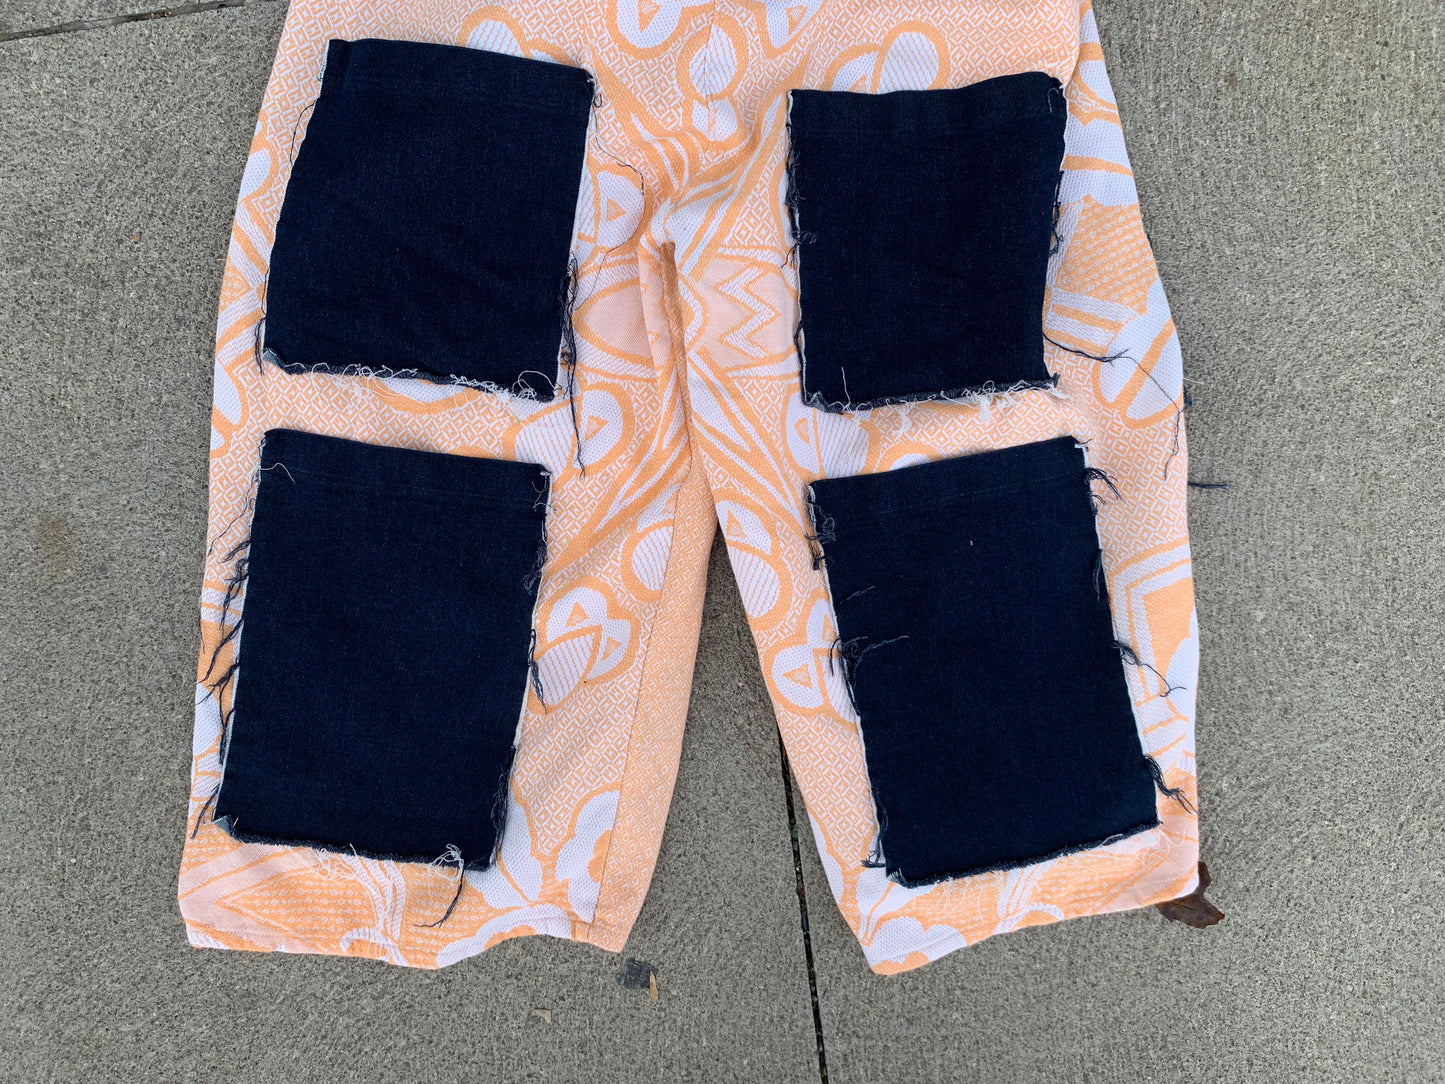 PEACHES & DENIM OVERALLS - FITS UP TO XL